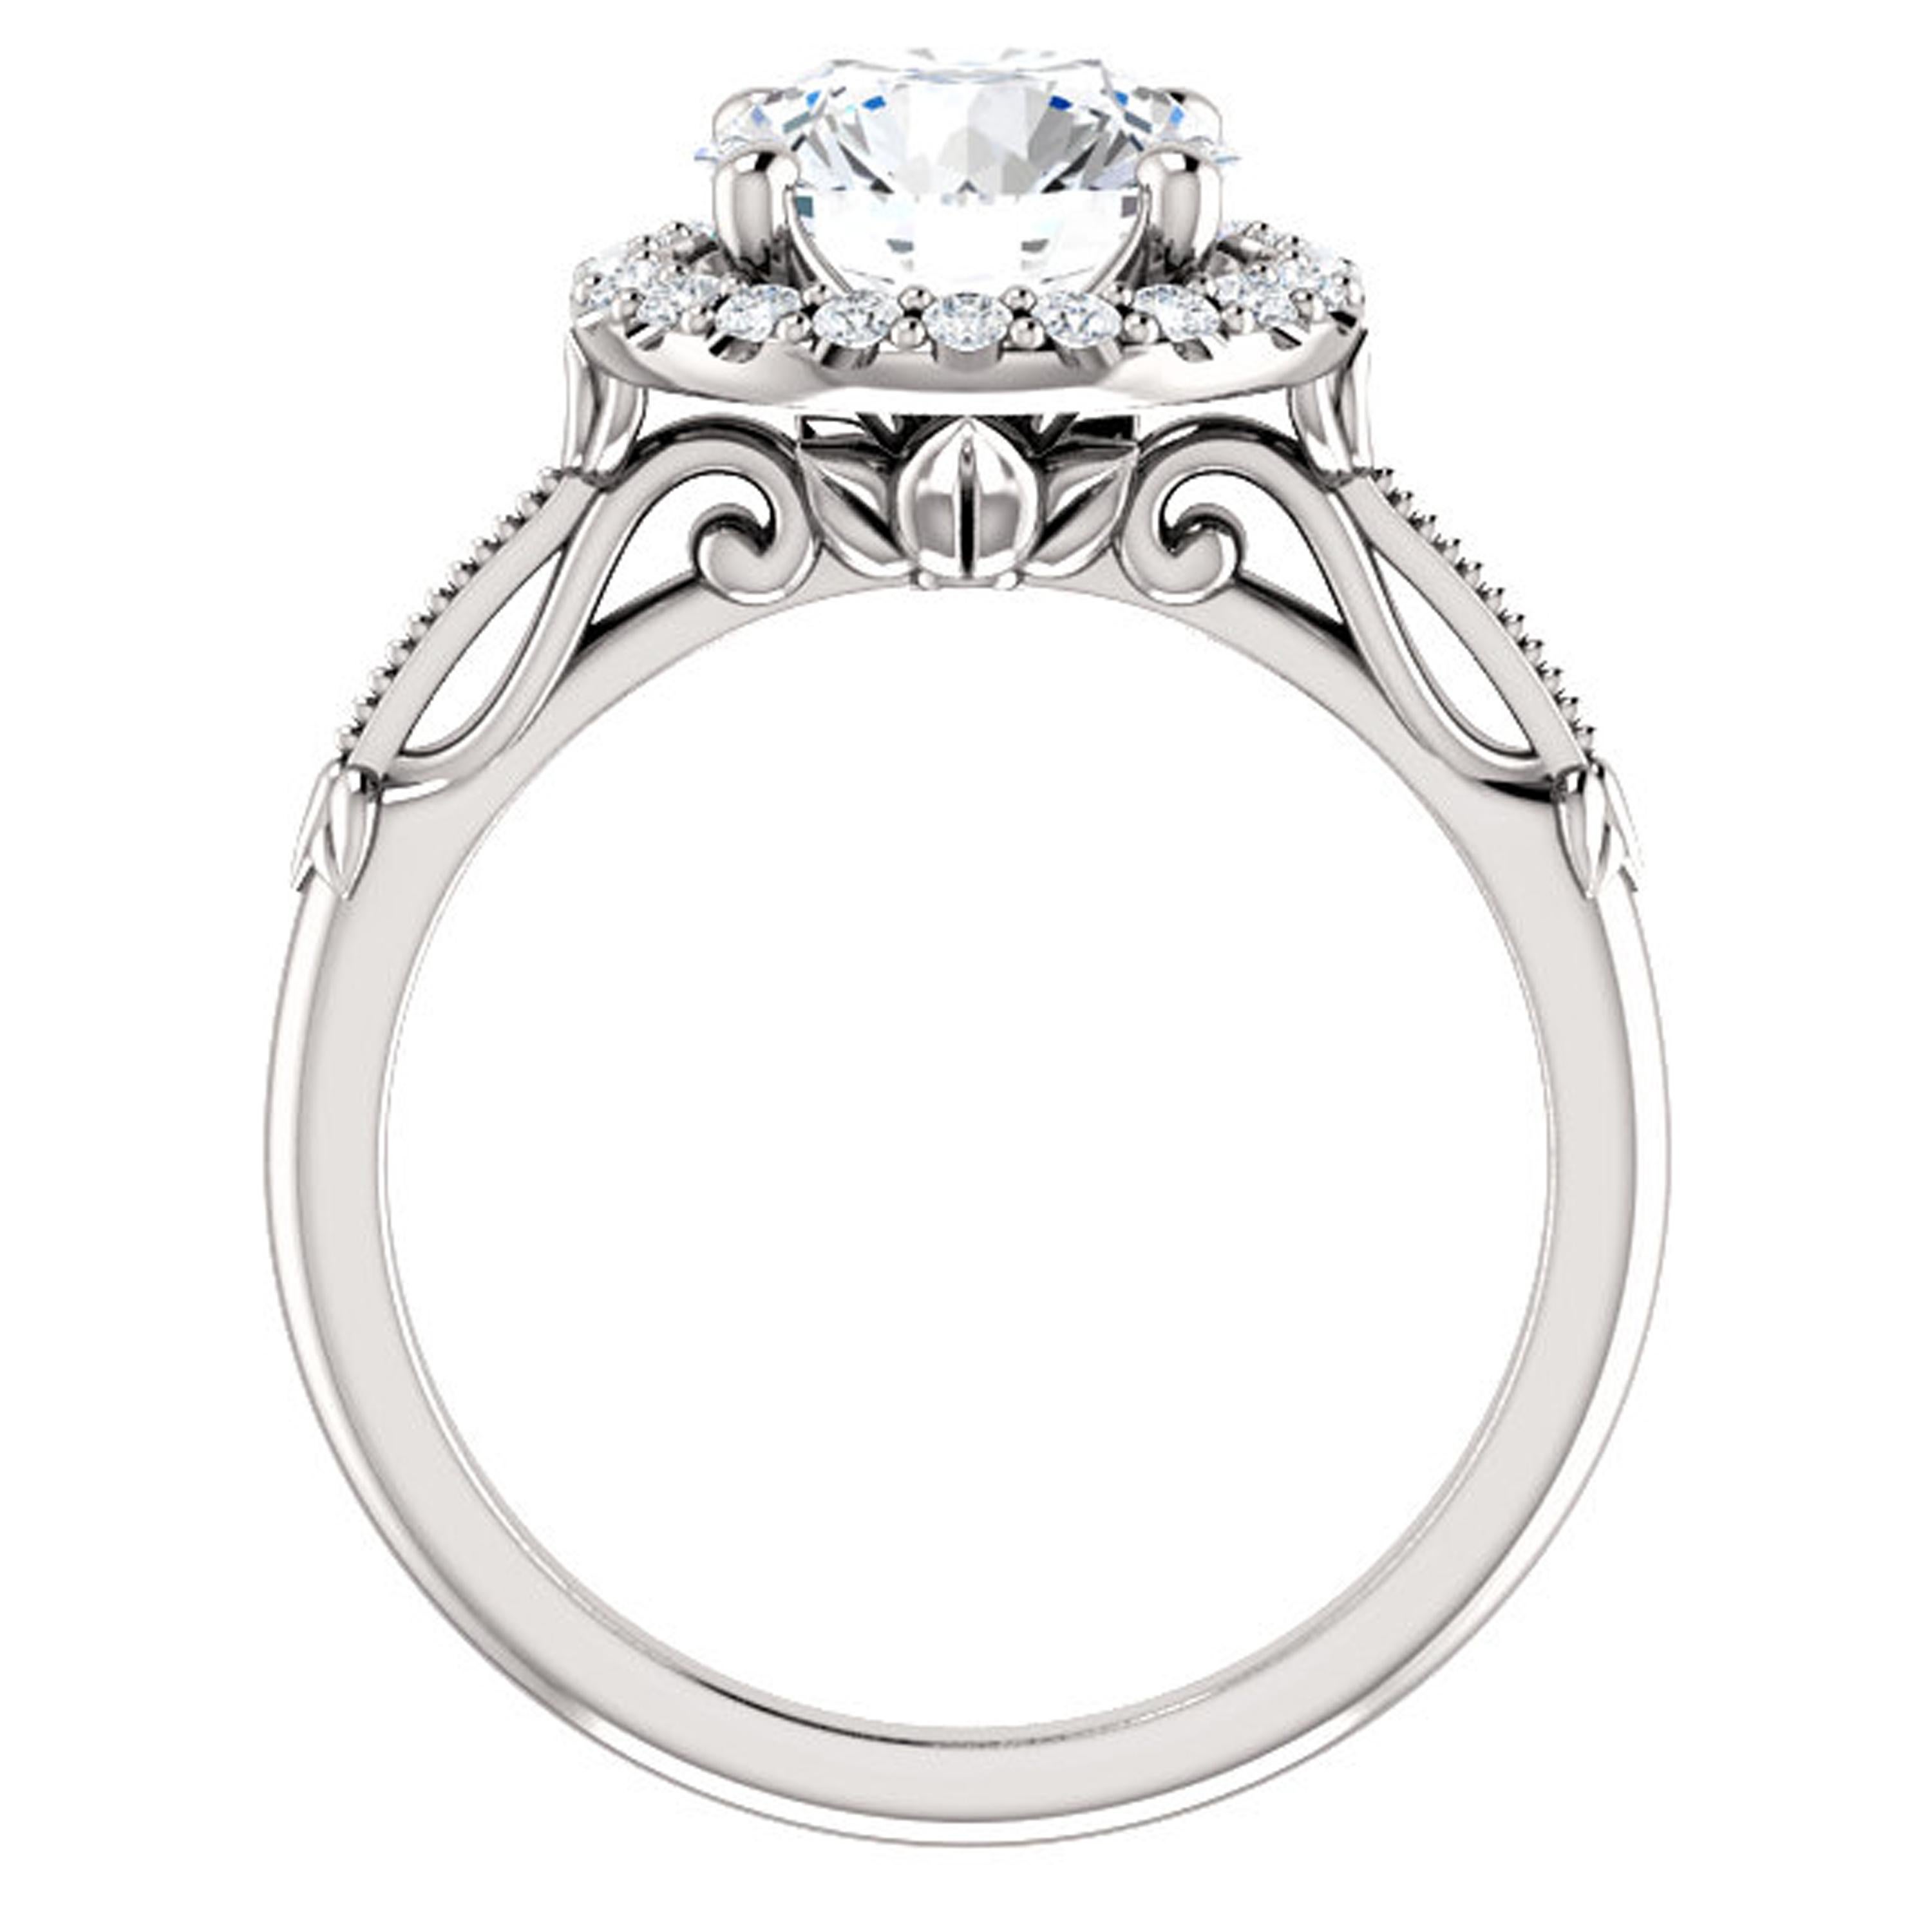 Beautiful filigree detailing adorns the shank and gallery of this halo style engagement ring. Shimmering diamonds full of life surround the halo.

Matching wedding band sold separately.

Center Stone:
1 Round-cut Natural Diamond
Diamond Weight: 0.75